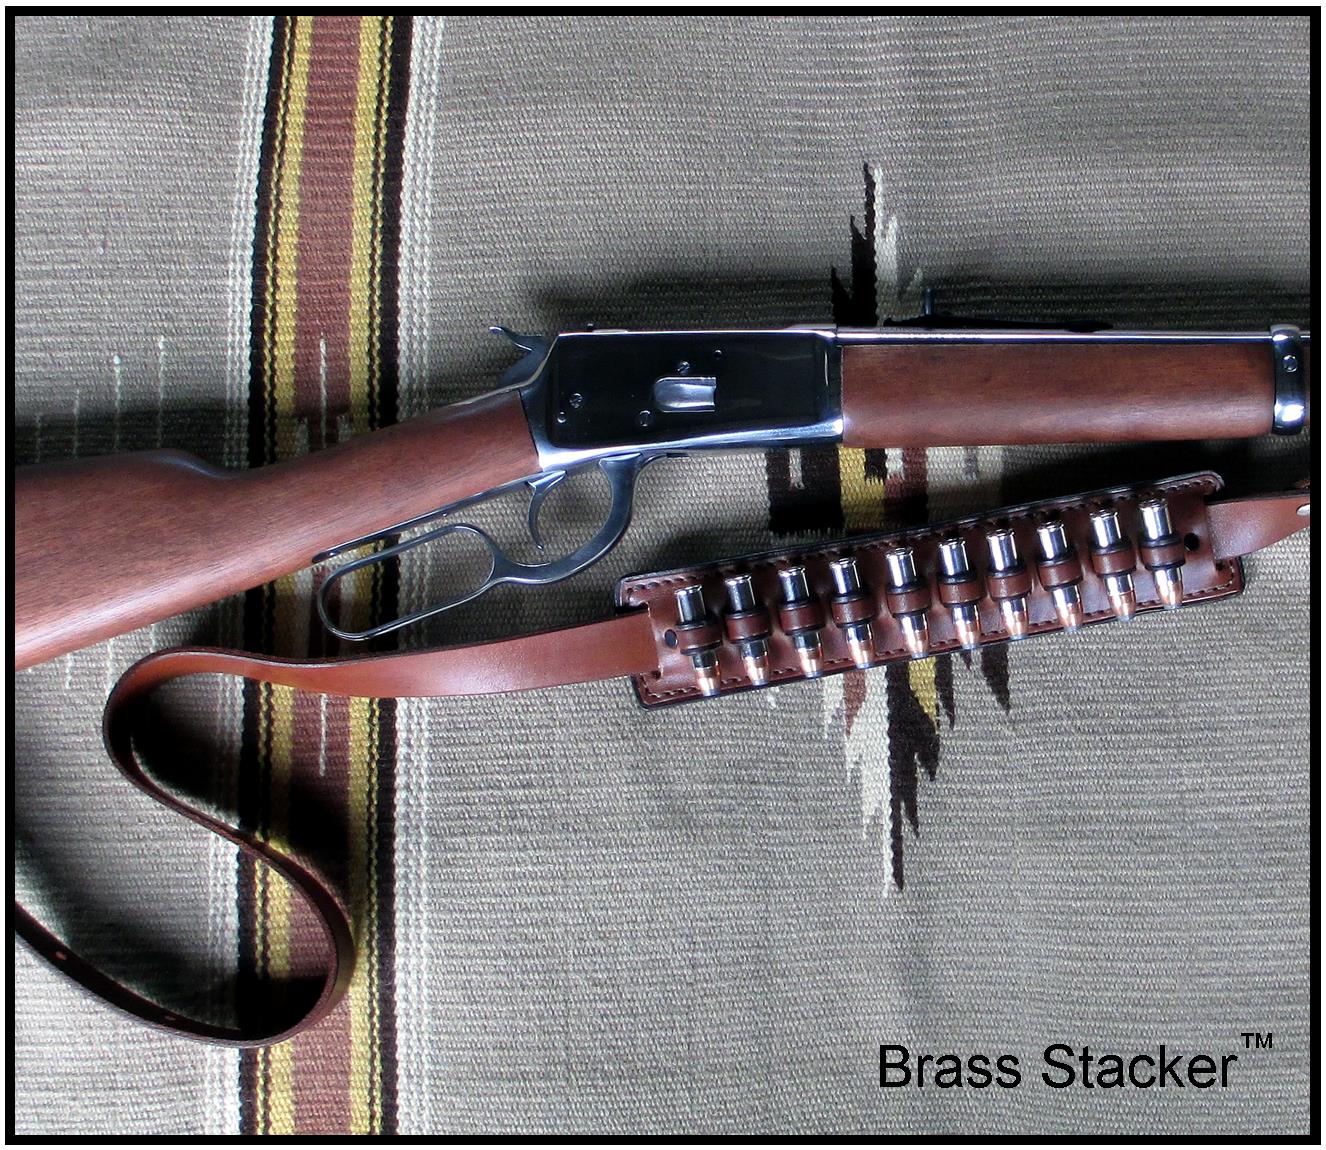 Brass Stacker™ RLO No-Drill Harnessed Rifle Sling for BROWNING™